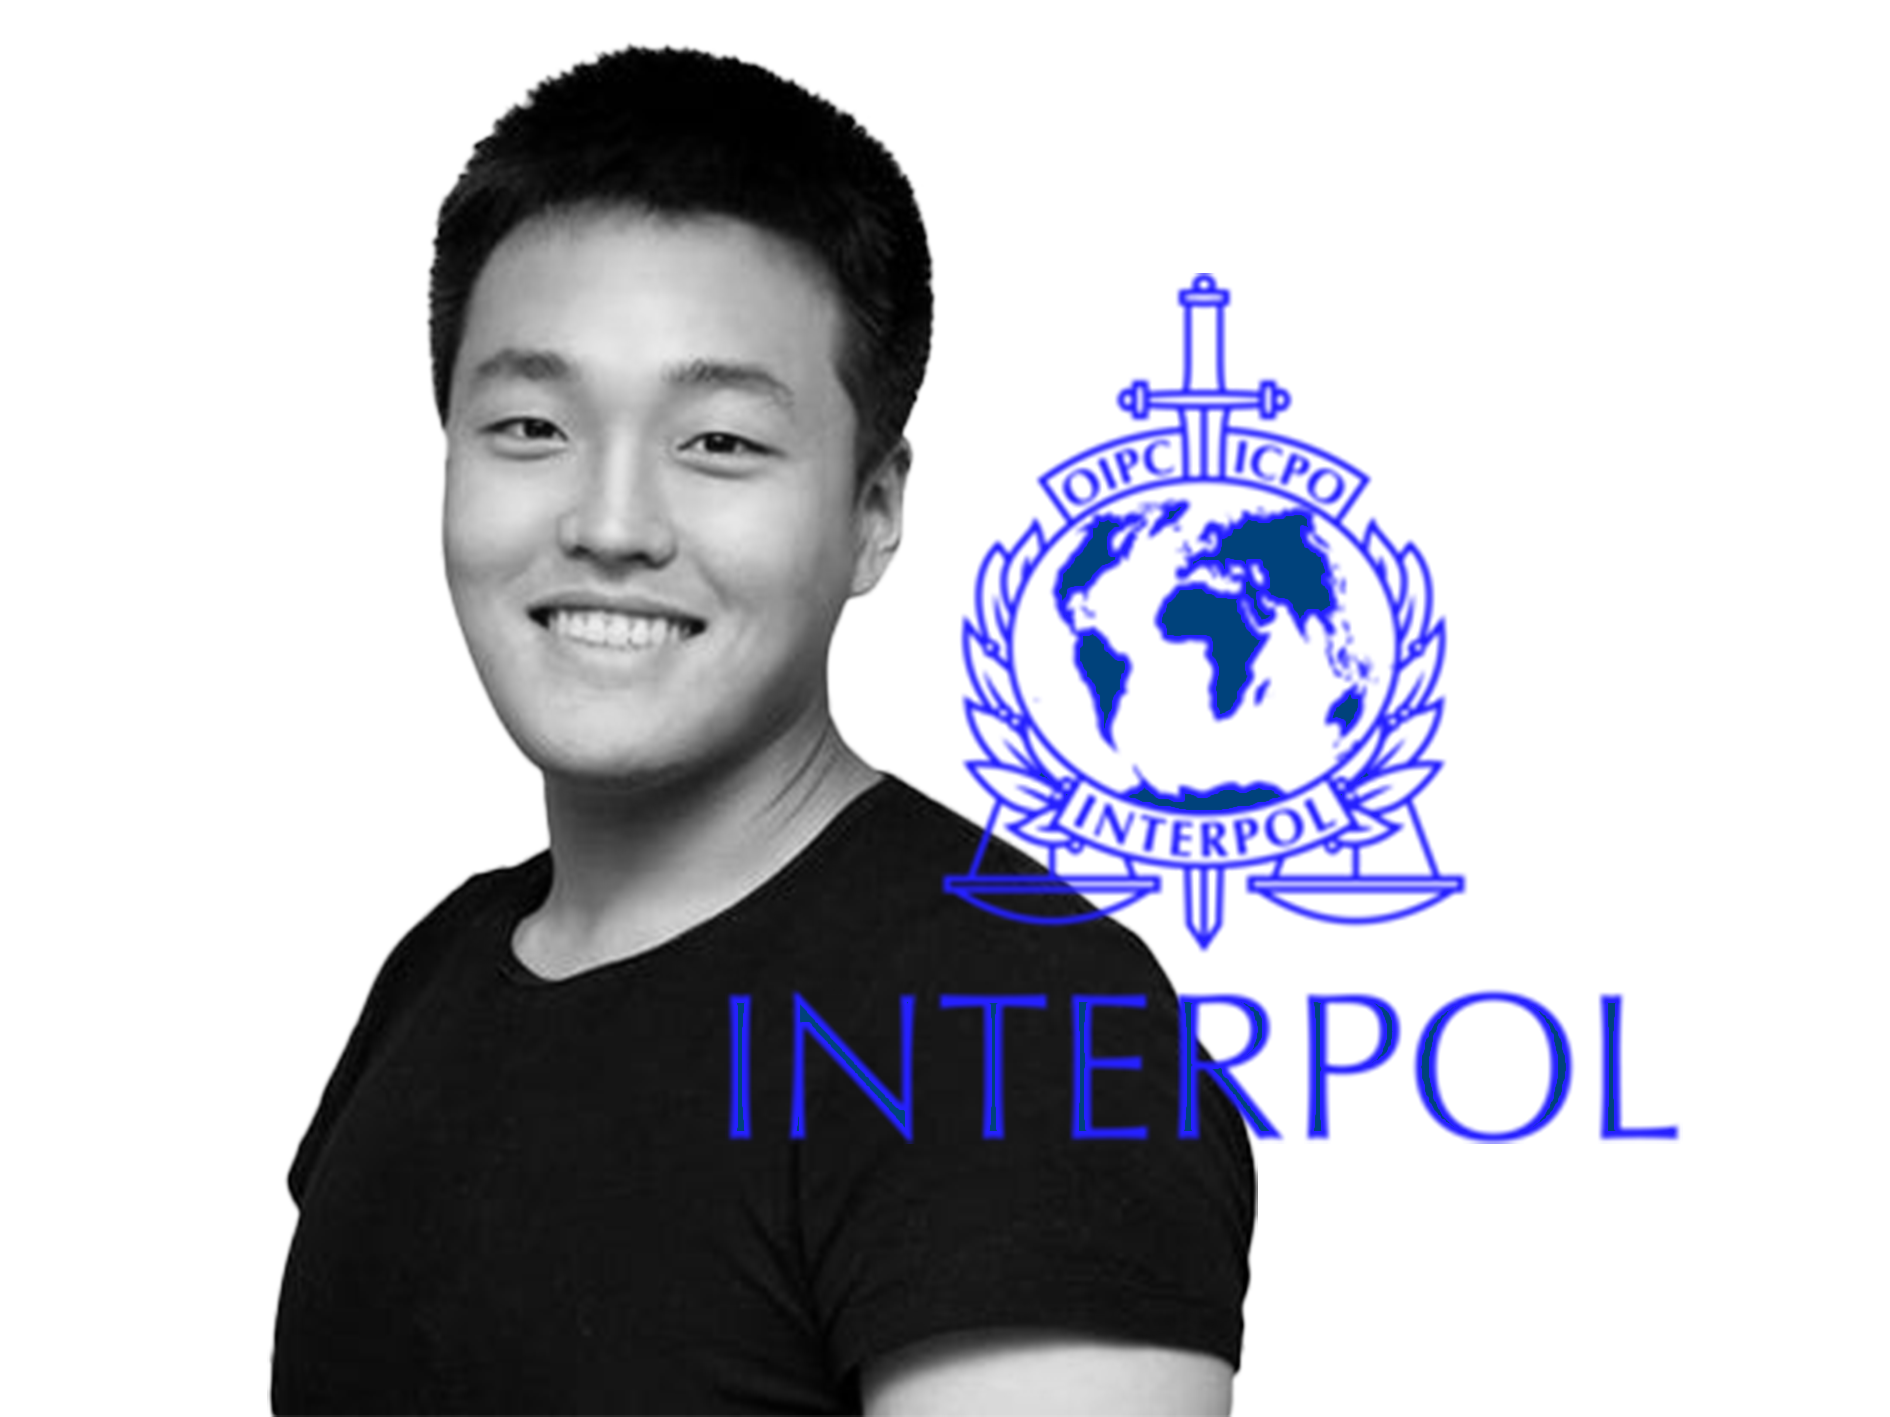 Interpol Issues Red Notice For Do Kwon Says South Korean Prosecutor